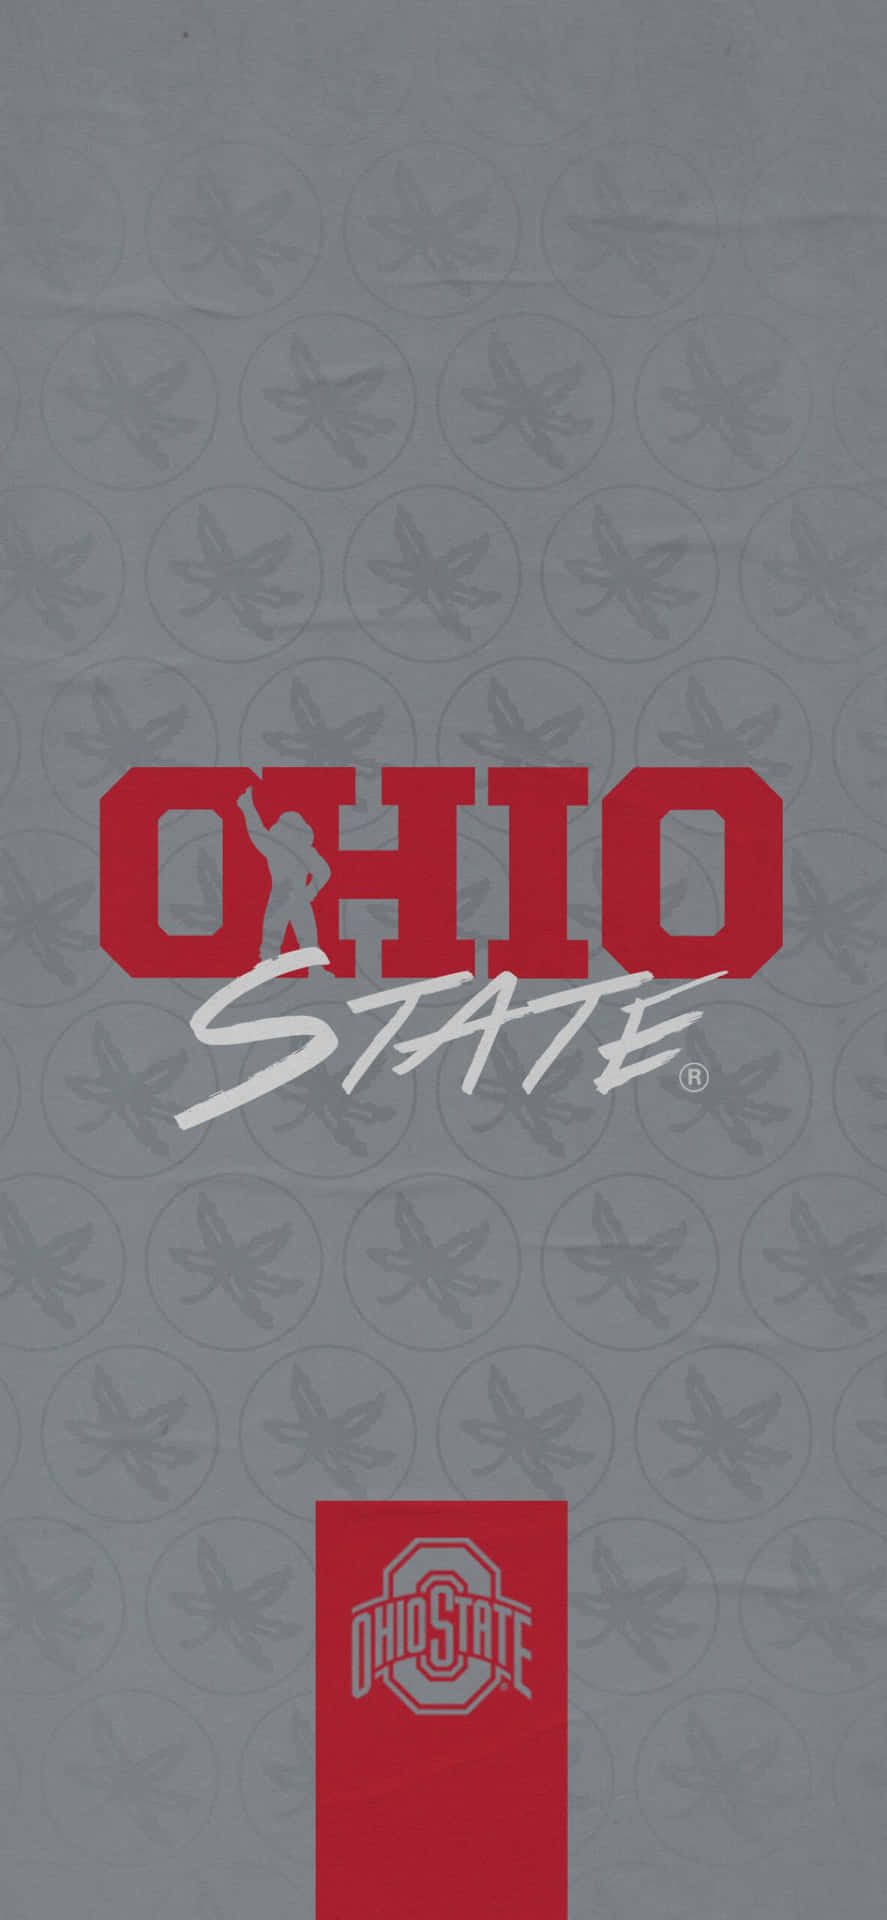 Vis Buckeye Stolthed med en Ohio State Iphone tapet. Wallpaper